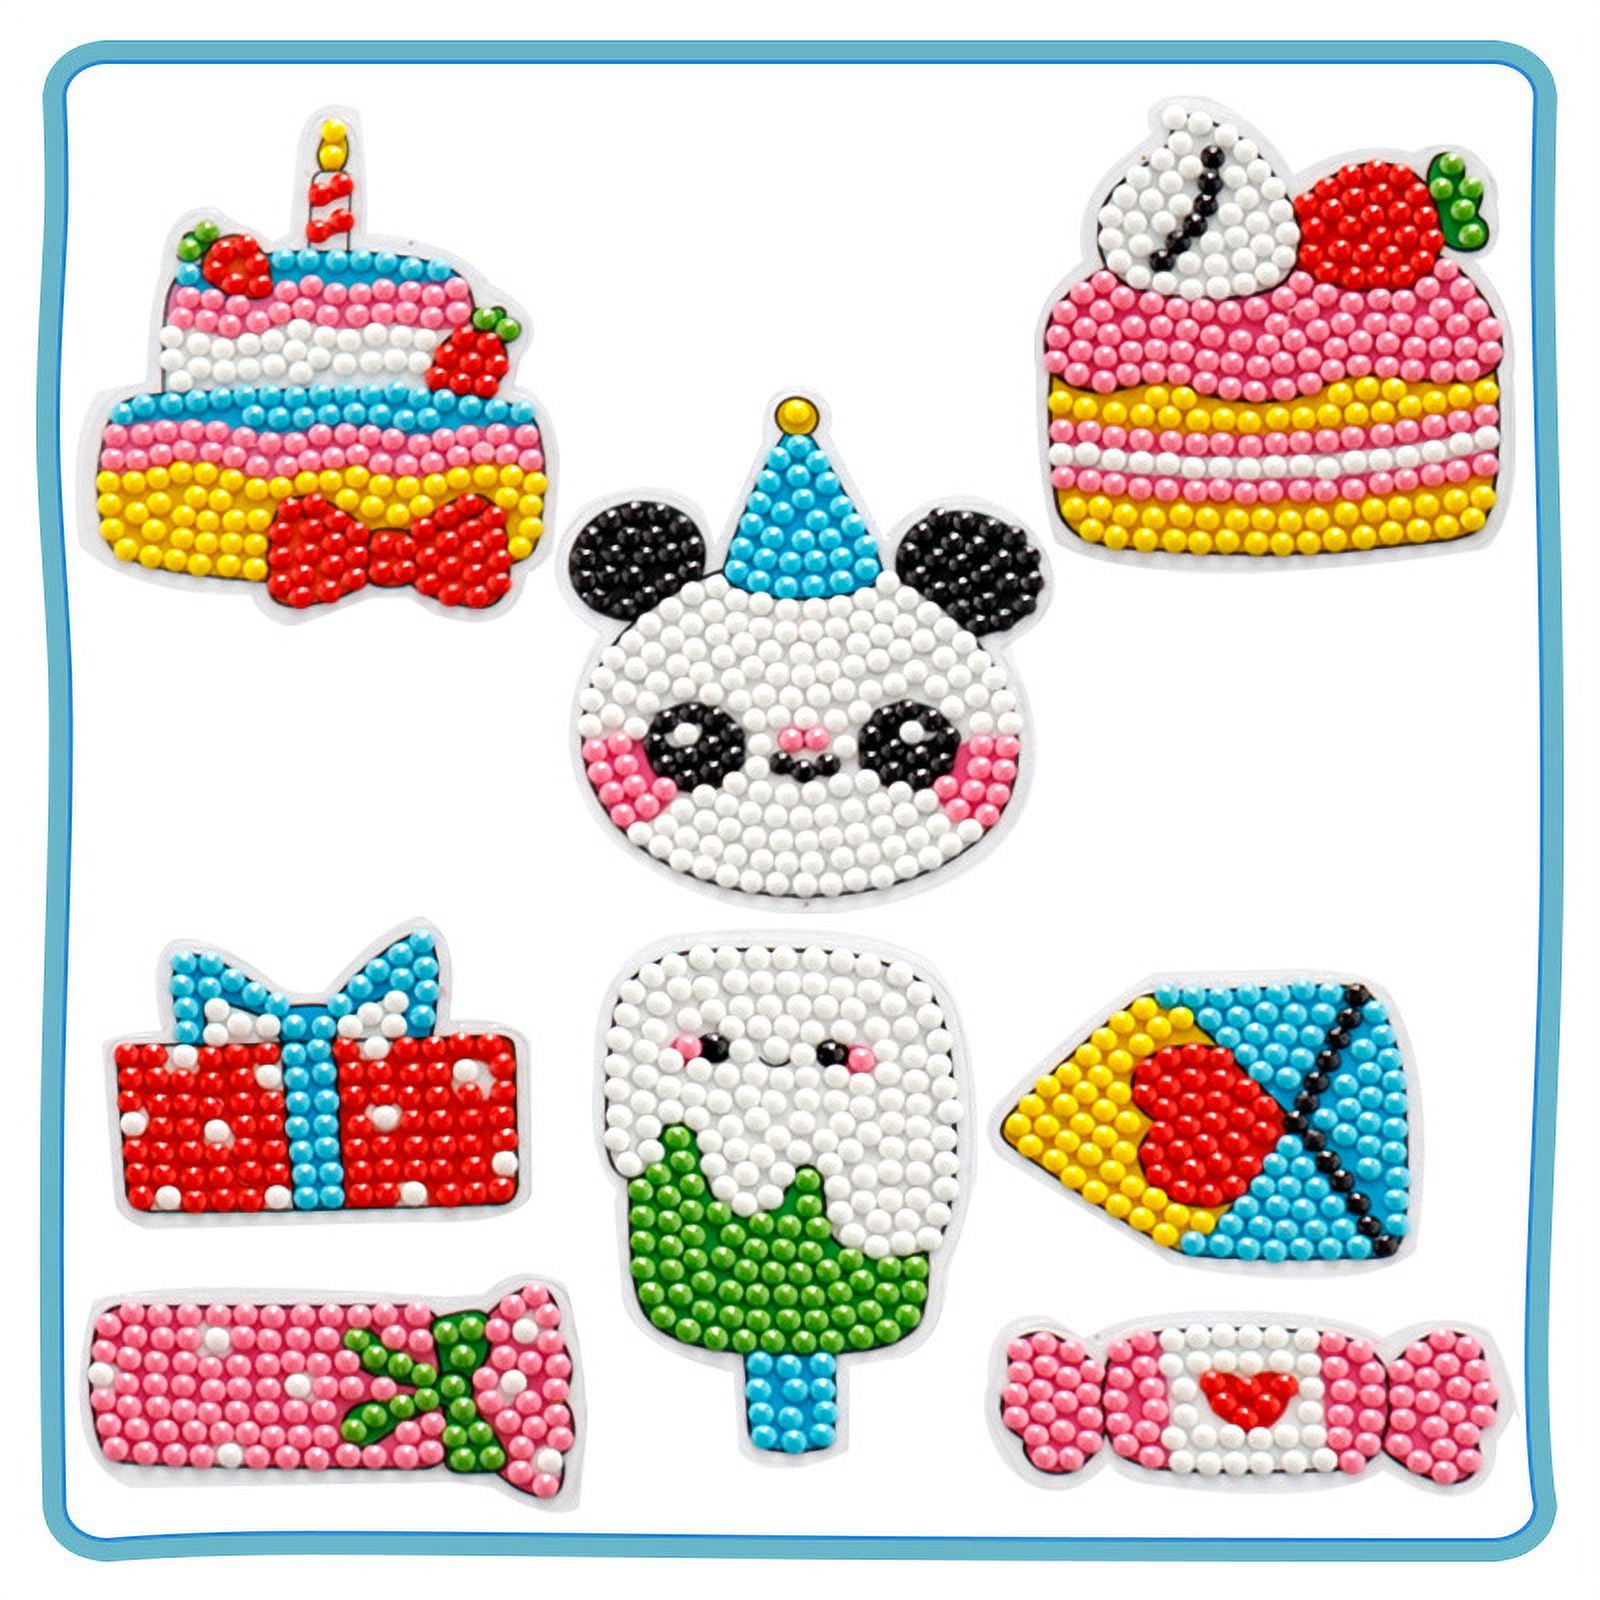 Diamond Painting Kits For Kids,DIY Art Craft Cartoon Diy Diamond Painting  Stickers, Numbers 5D Diamonds For Children Adult Beginners From  Toy_superman, $2.64